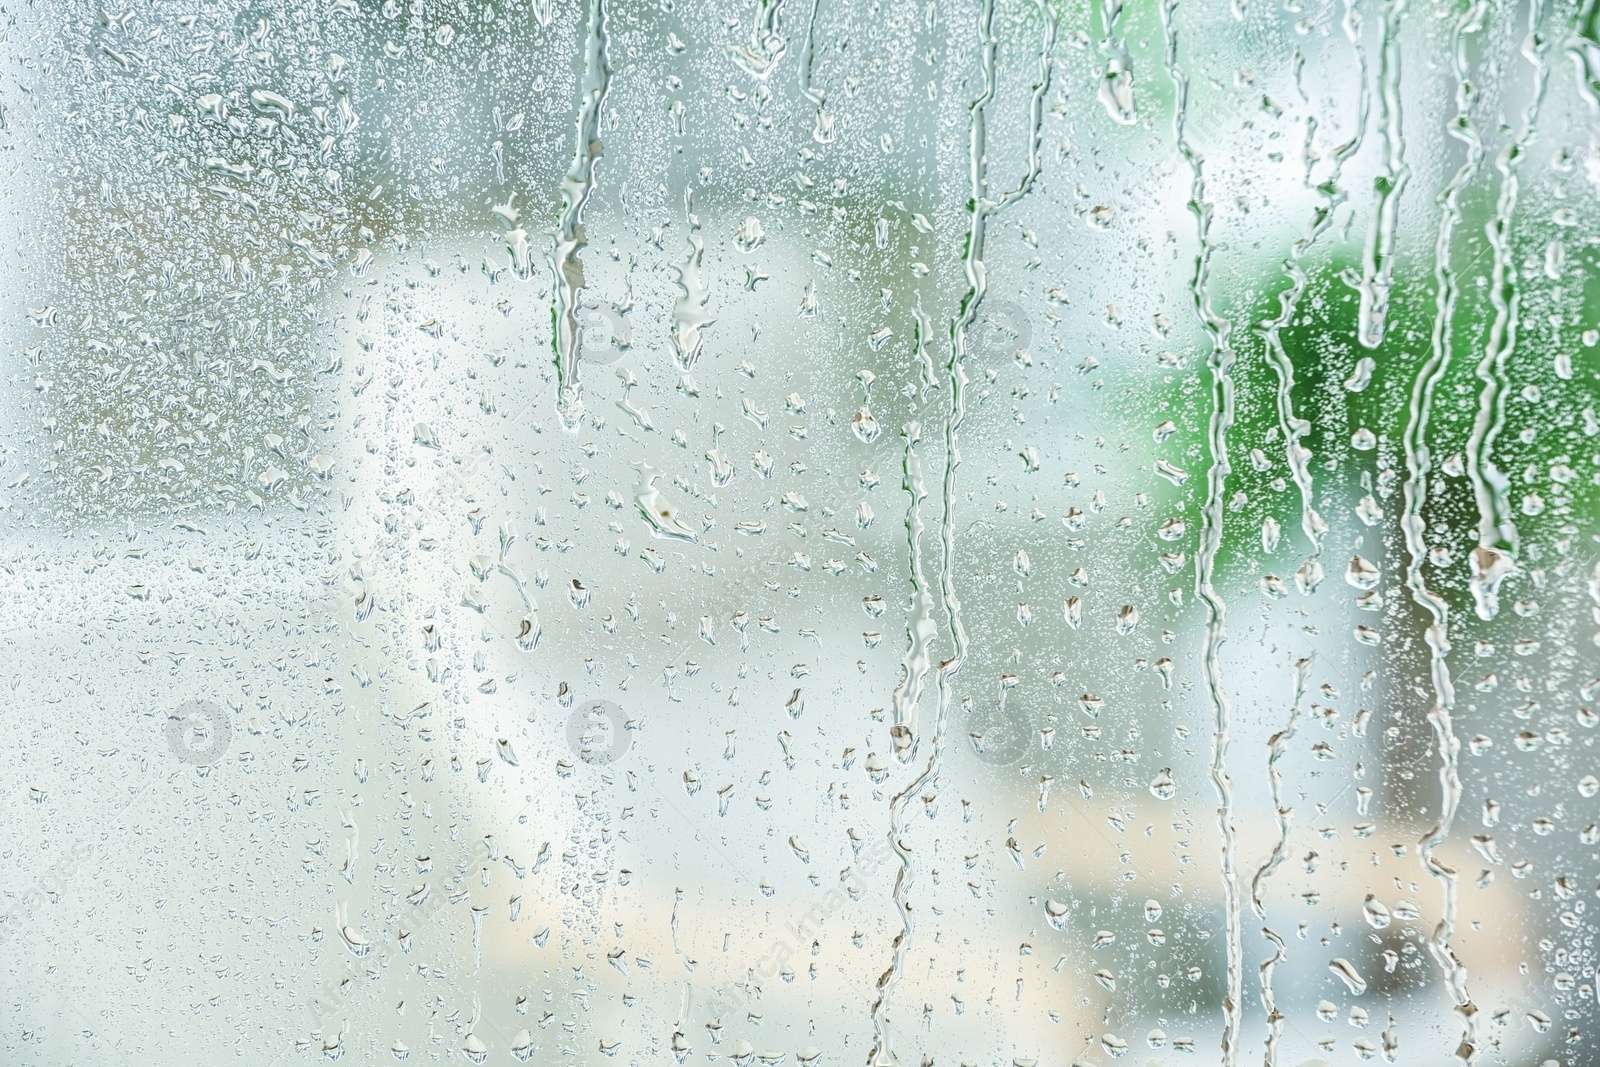 Photo of Blurred view of room through glass with water drops, closeup